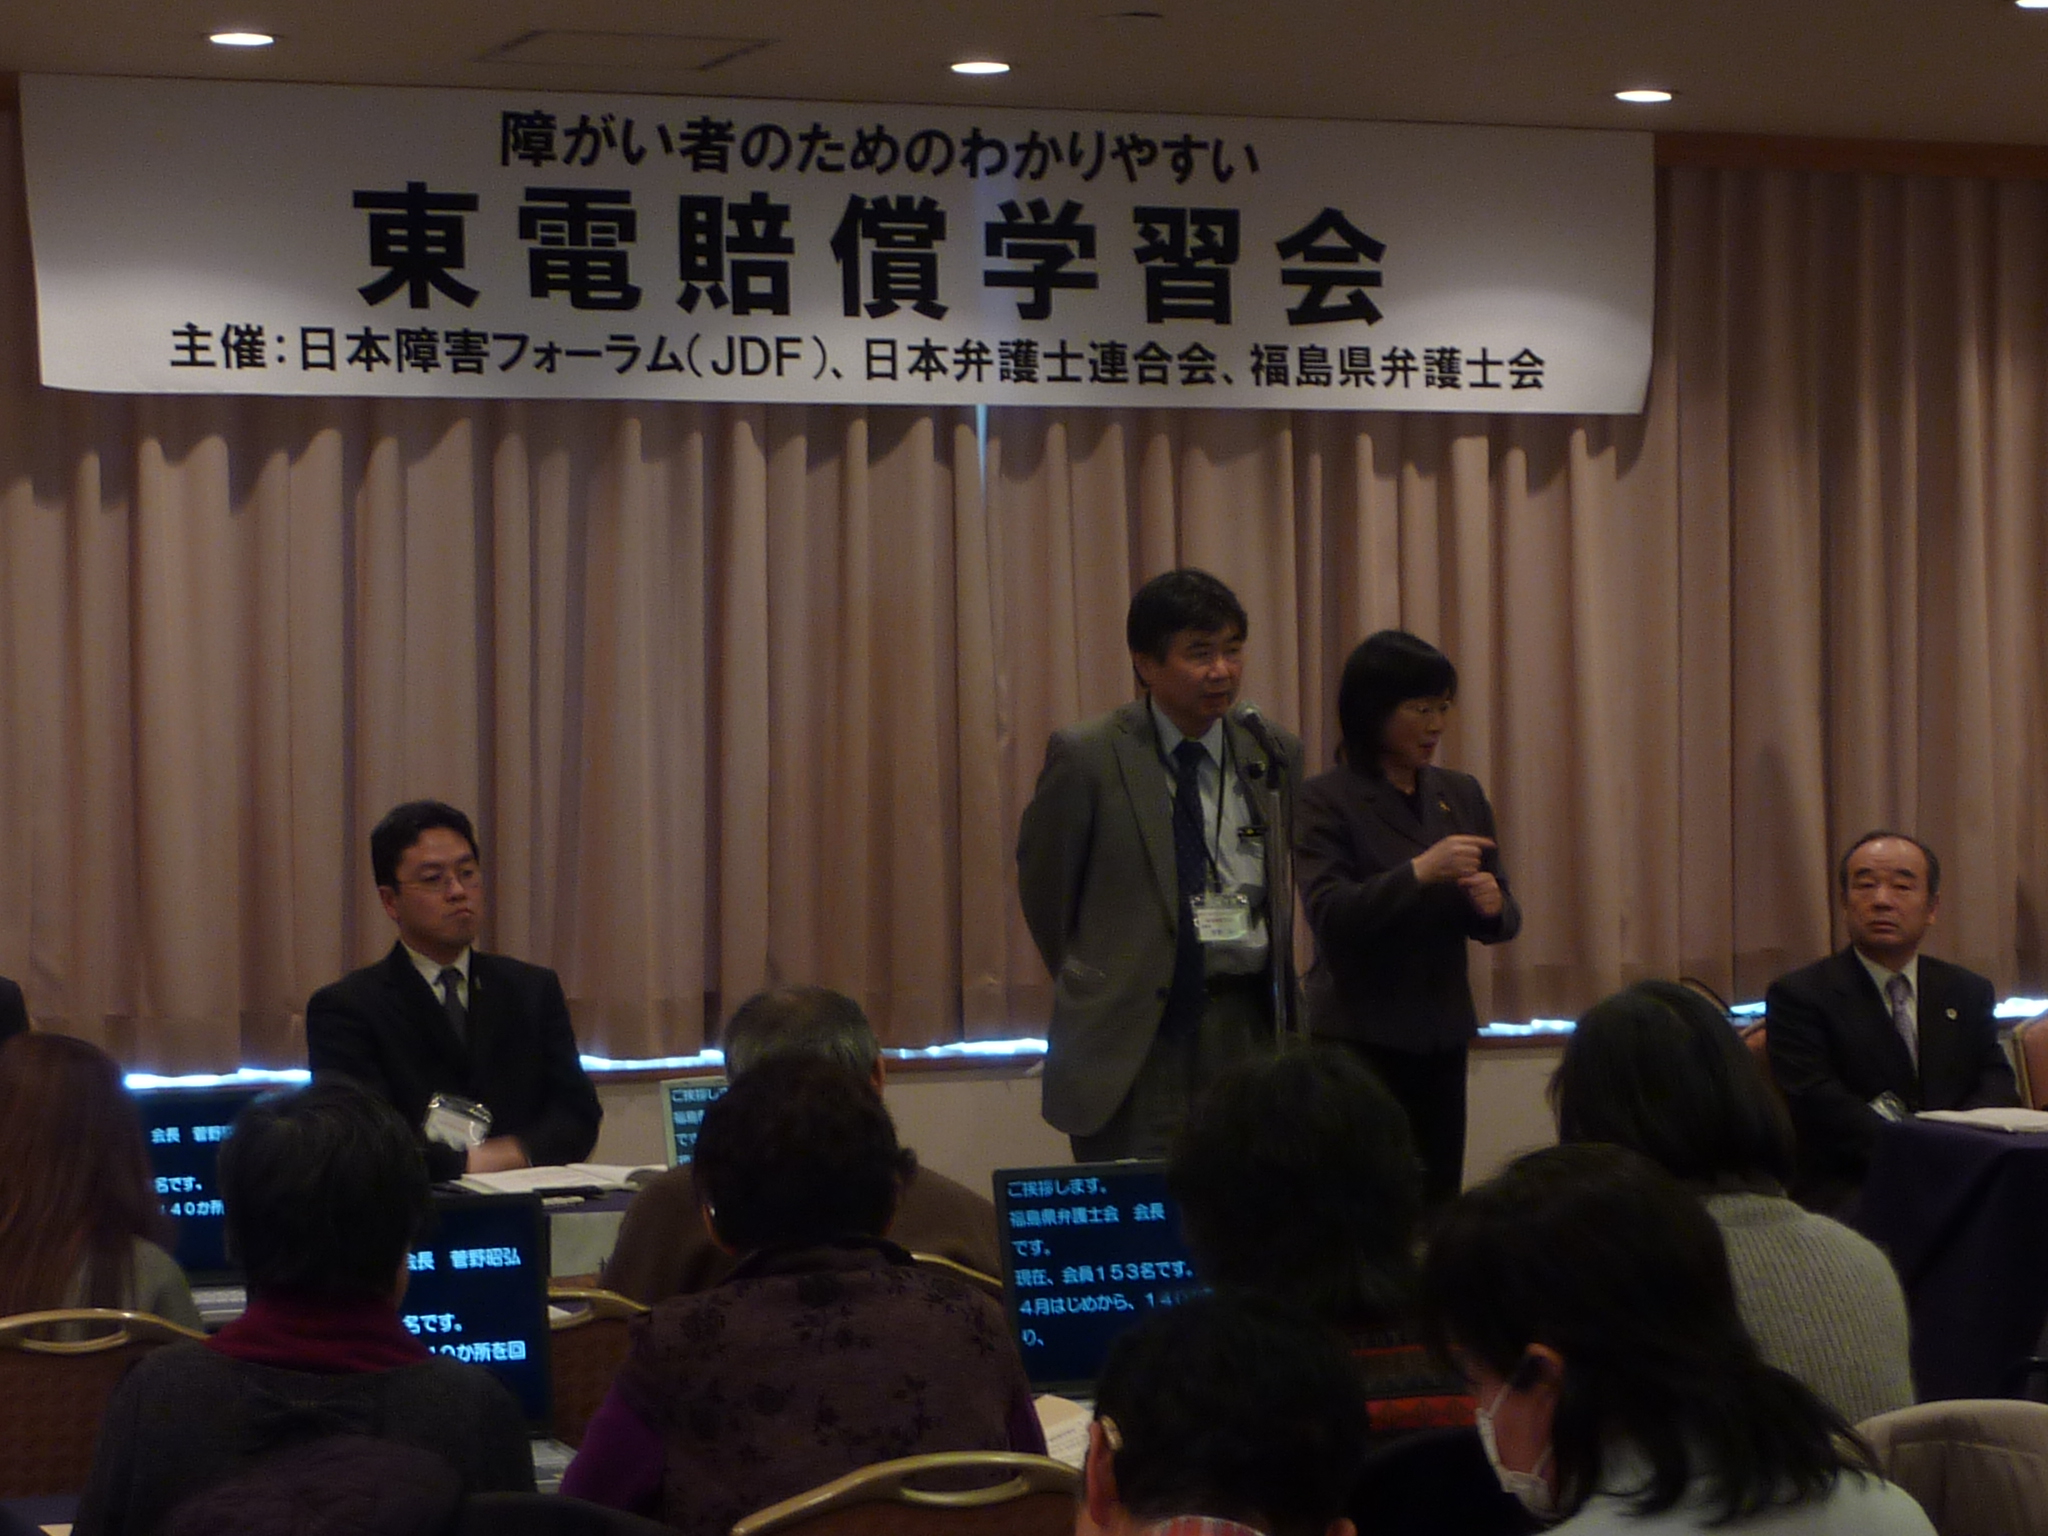 Workshops on compensation due to the Fukushima nuclear accident.